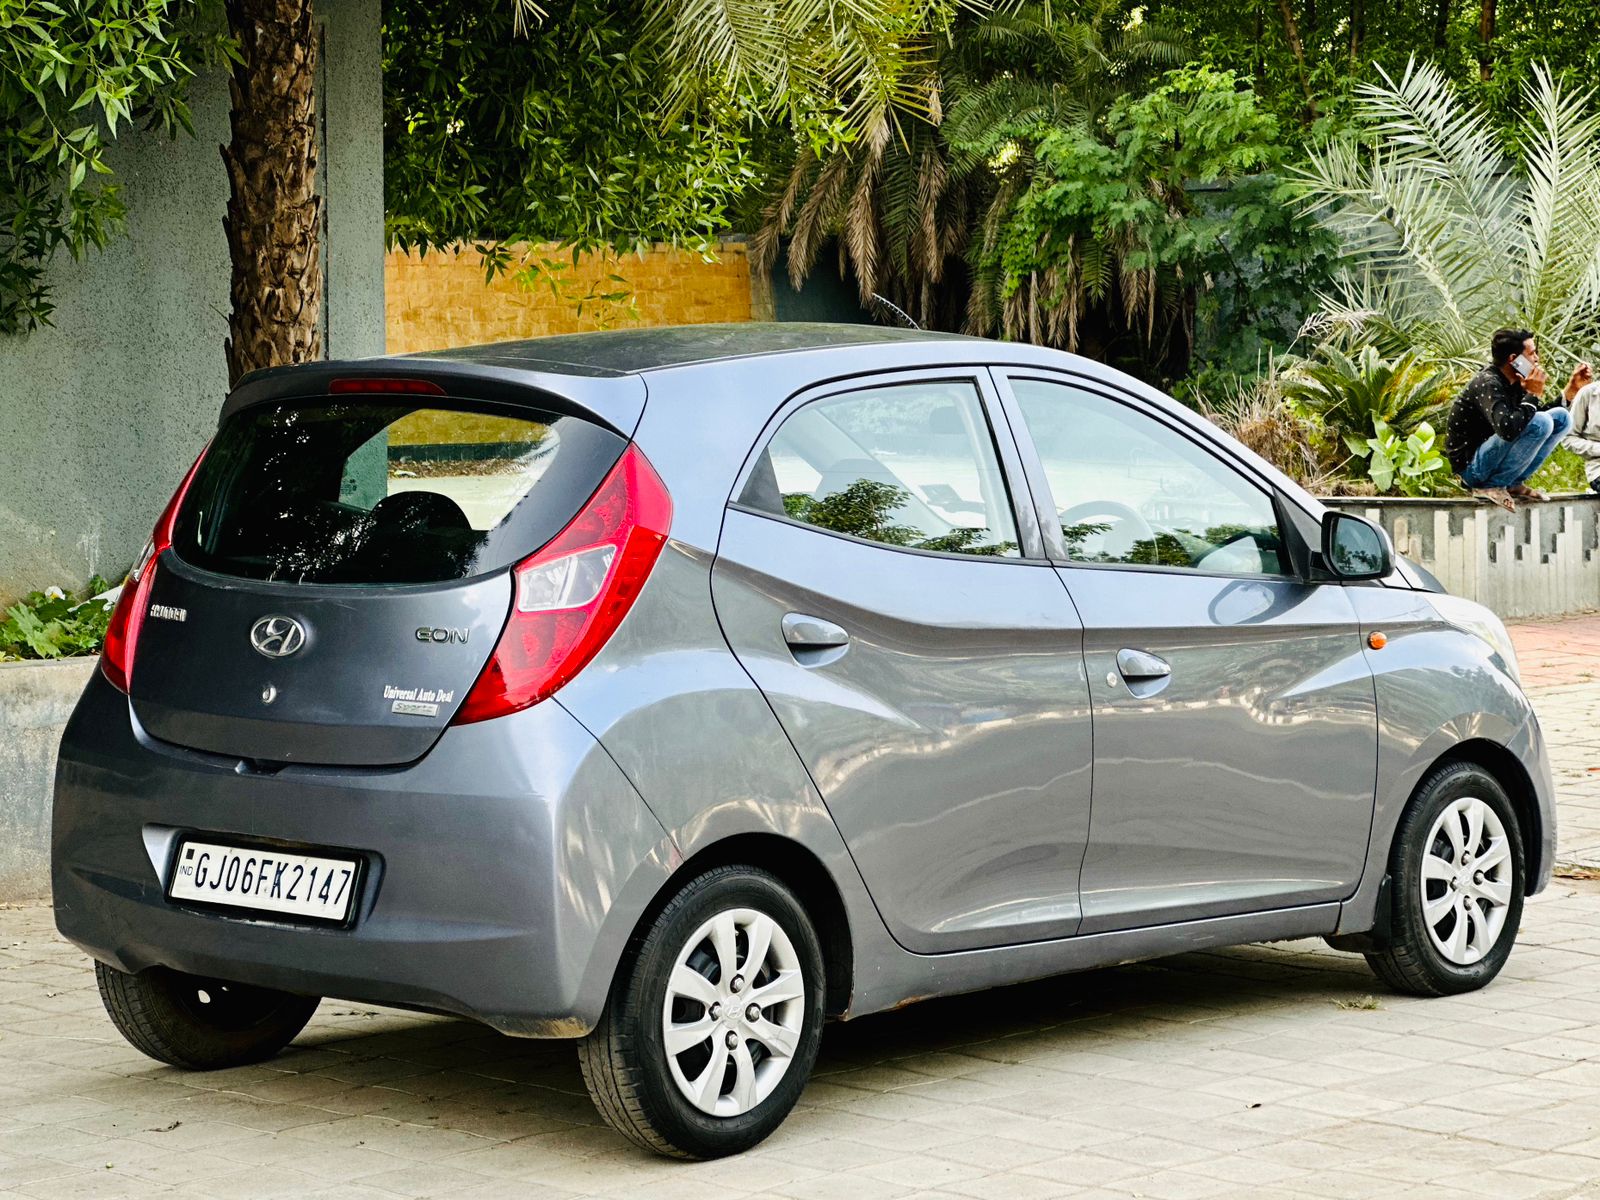 Details View - Hyundai EON photos - reseller,reseller marketplace,advetising your products,reseller bazzar,resellerbazzar.in,india's classified site, Hyundai EON , used Hyundai EON  , old  Hyundai EON ,old  Hyundai EON in Vadodara , Hyundai EON  in Vadodara